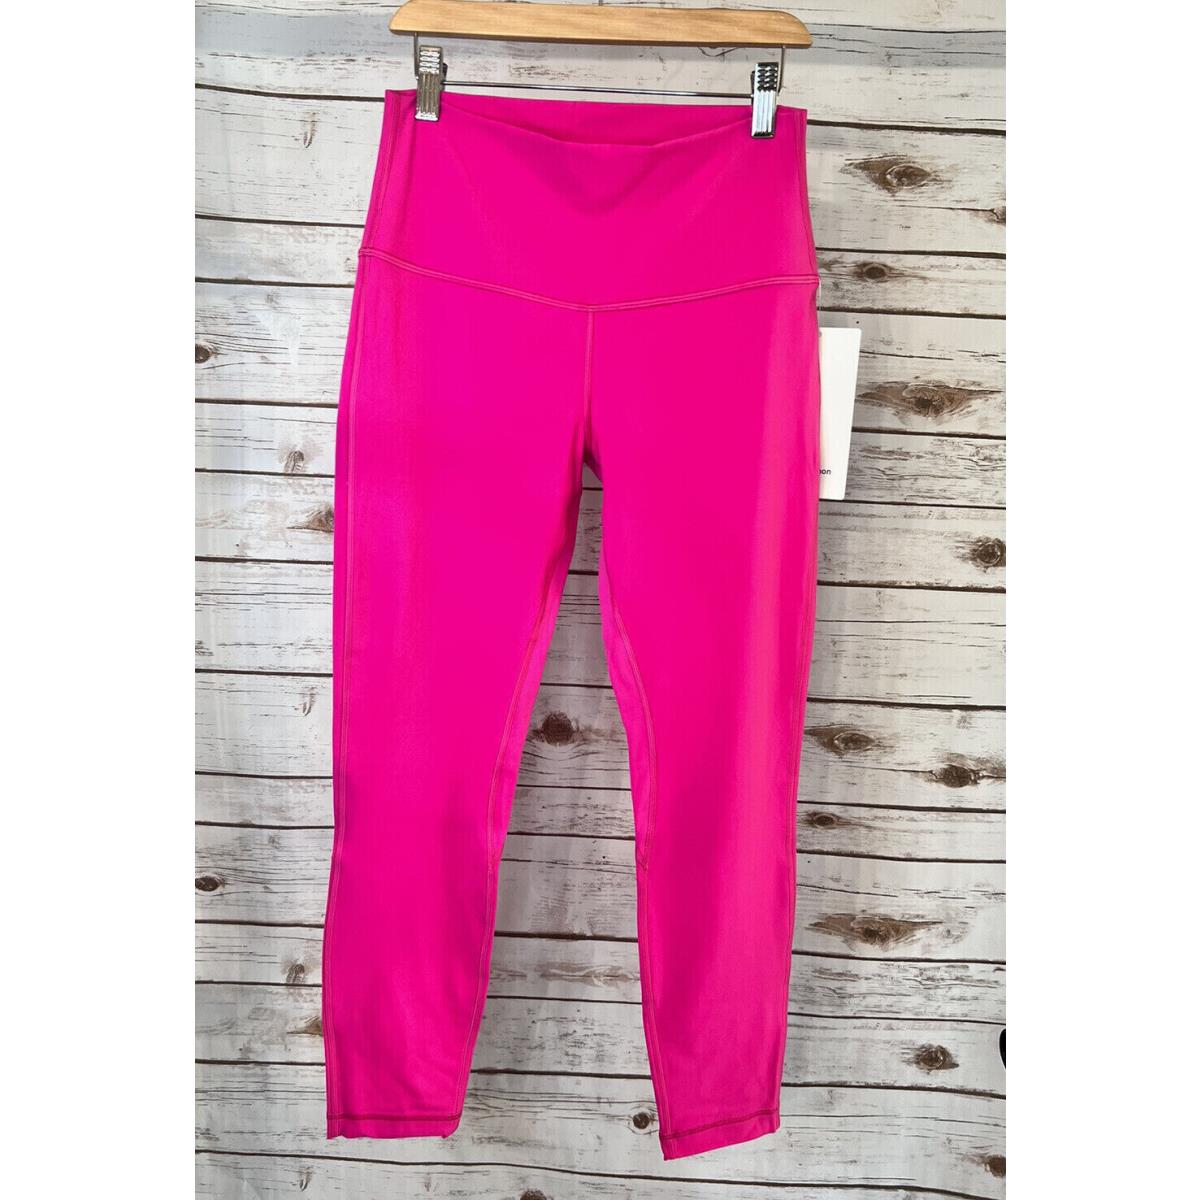 Womens Lululemon Size 12 Align HR Pant 21 Sonic Pink Sncp Nulu Tight Soft